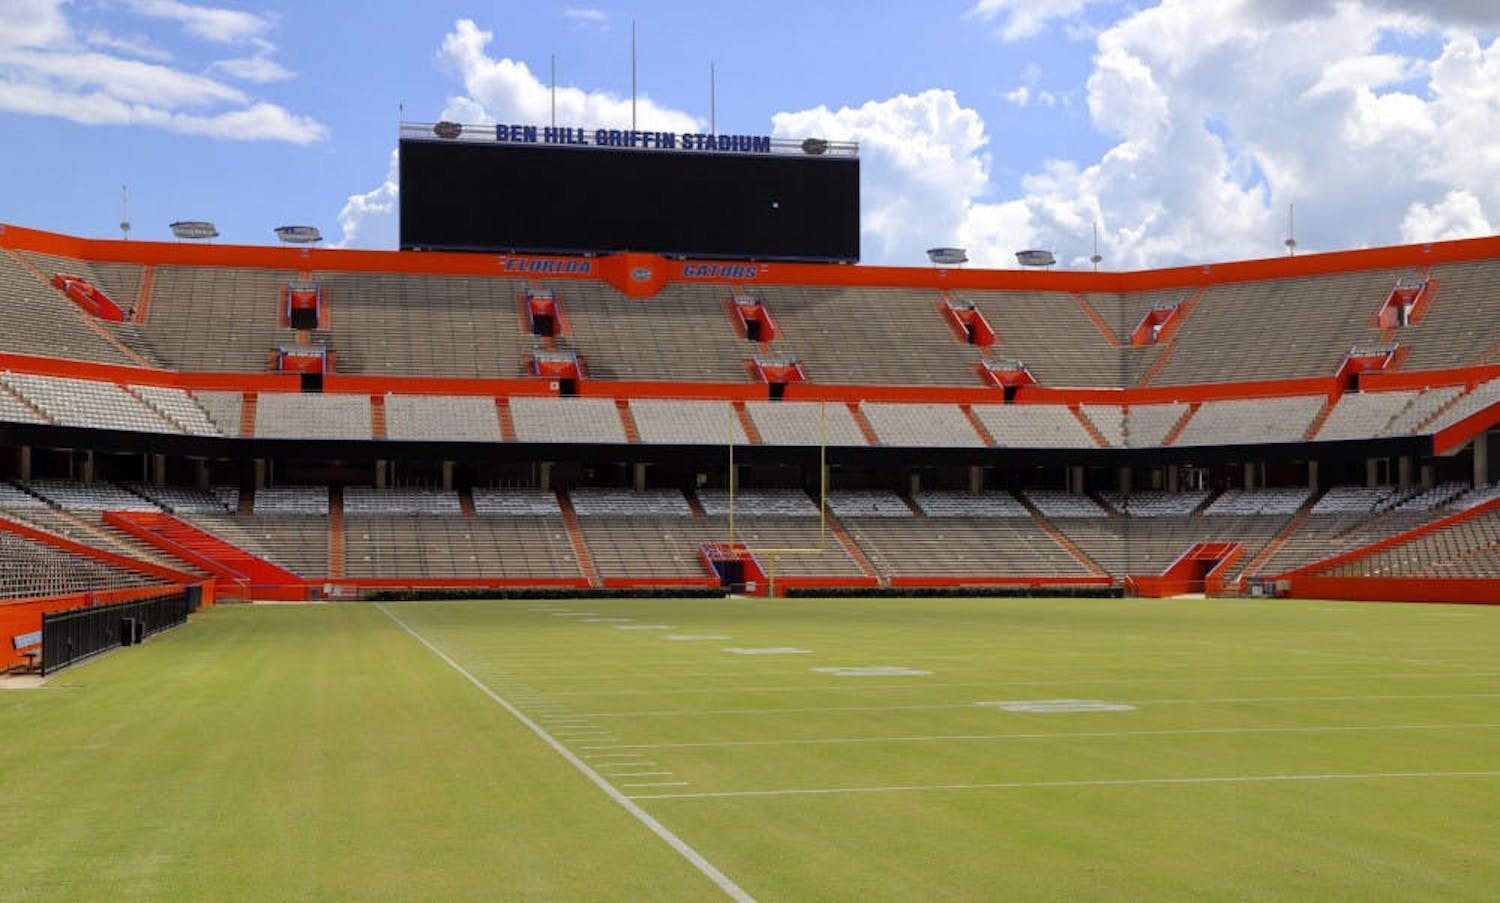 The SEC announced Wednesday it would grant The University of Florida, as well as its 13 other member universities, $23 million to compensate for lost revenue from COVID-19